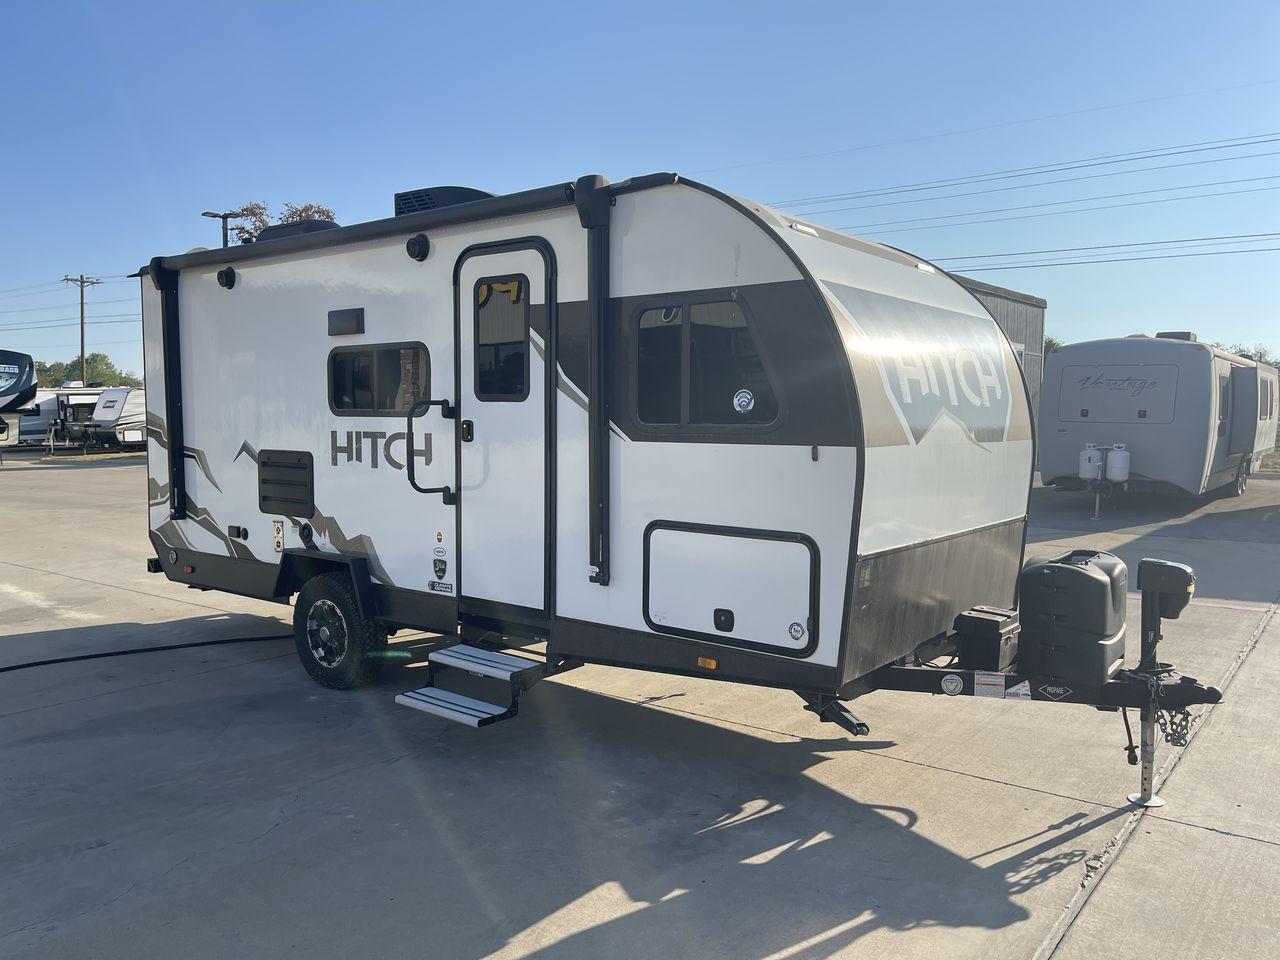 2022 CRUISER RV HITCH 18BHS (5RXRB2319N1) , Length: 22 ft | Dry Weight: 4,030 lbs | Gross Weight: 5,000 lbs | Slides: 1 transmission, located at 4319 N Main Street, Cleburne, TX, 76033, (817) 221-0660, 32.435829, -97.384178 - The 2022 Cruiser RV Corp Hitch 18BHS is a compact yet feature-packed travel trailer perfect for those who value comfort and convenience during their travels. Featuring a sleek and modern exterior design, this lightweight trailer measures approximately 22 feet in length, making it easy to tow and man - Photo #22